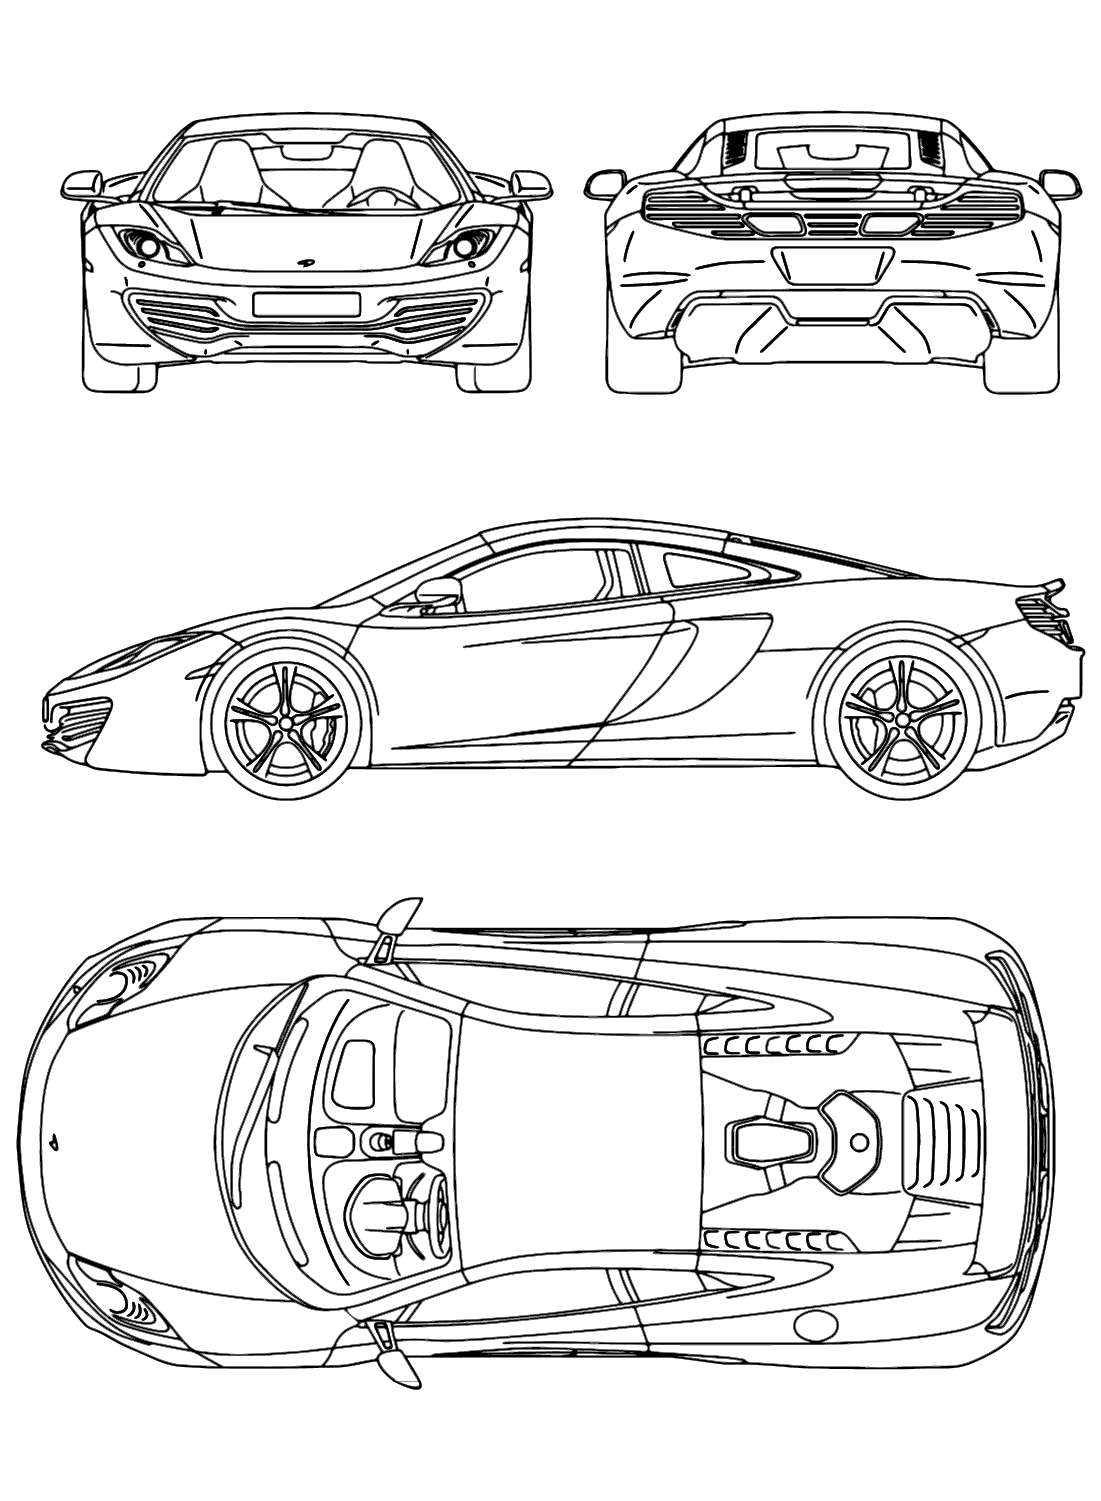 McLaren MP4-12C Coloring Page - Free Printable Coloring Pages